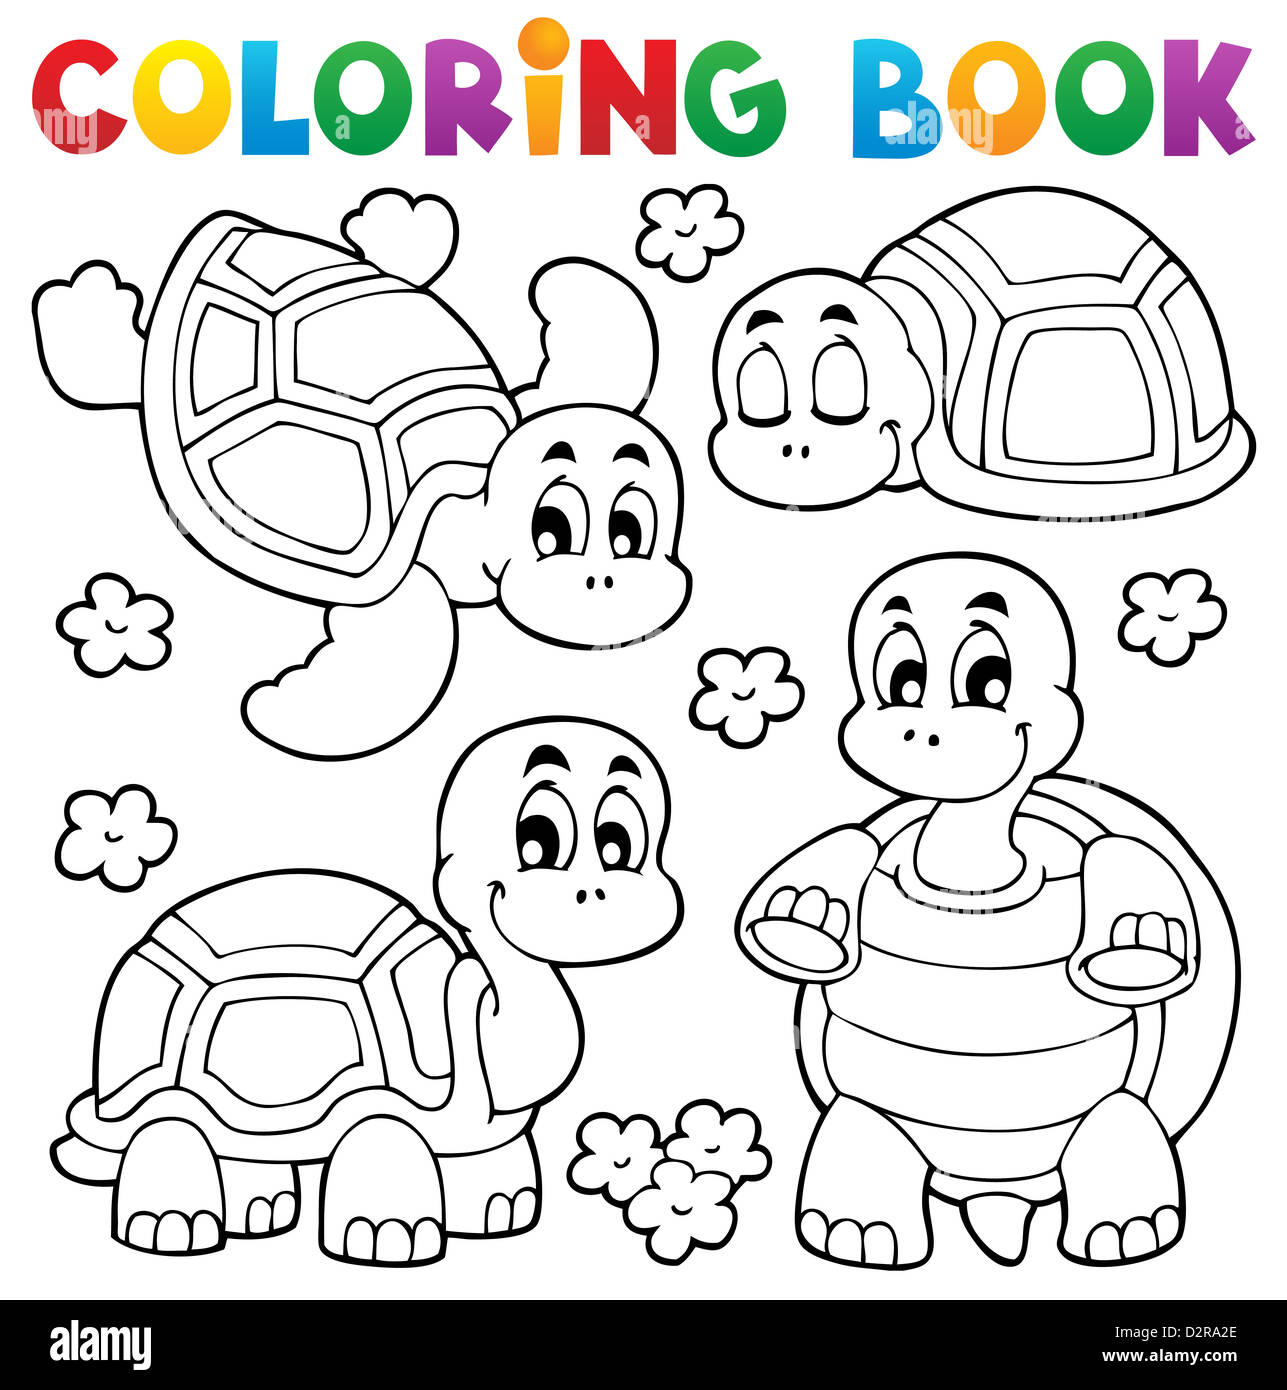 Coloring book turtle theme 1 - picture illustration. Stock Photo